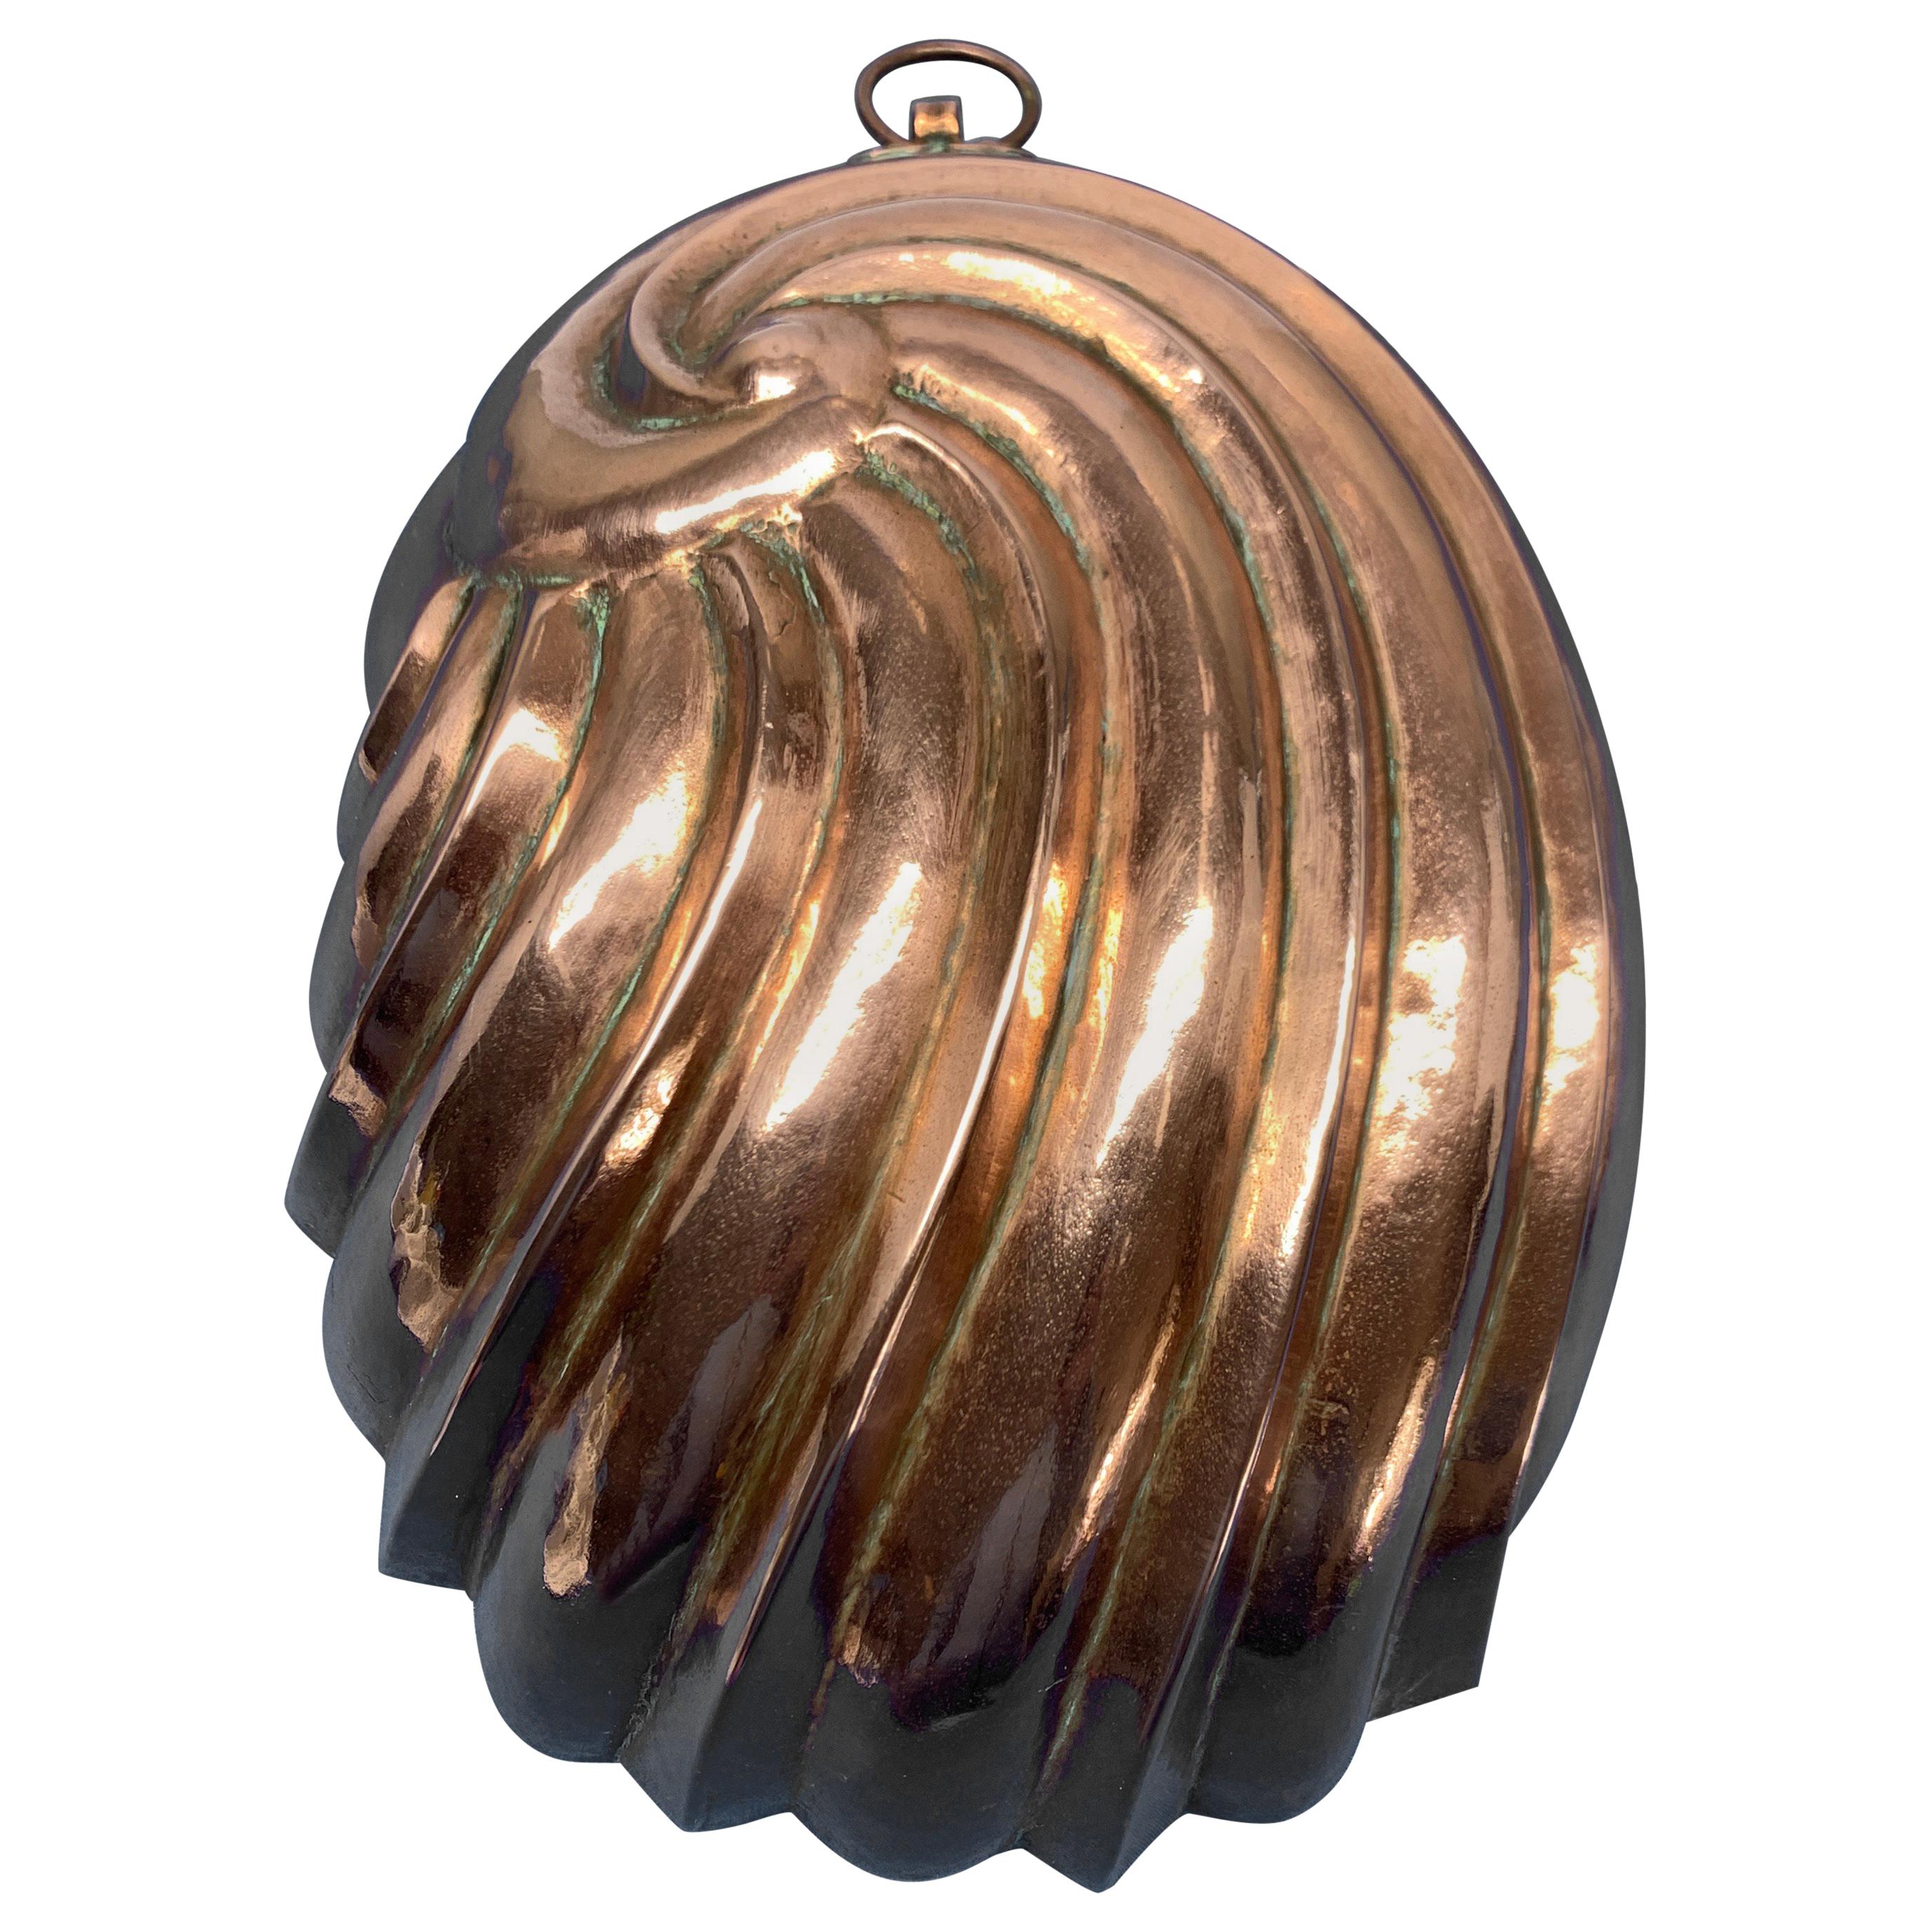 Danish Early 19th Century Copper Form or Dish in the Shape of a Conch